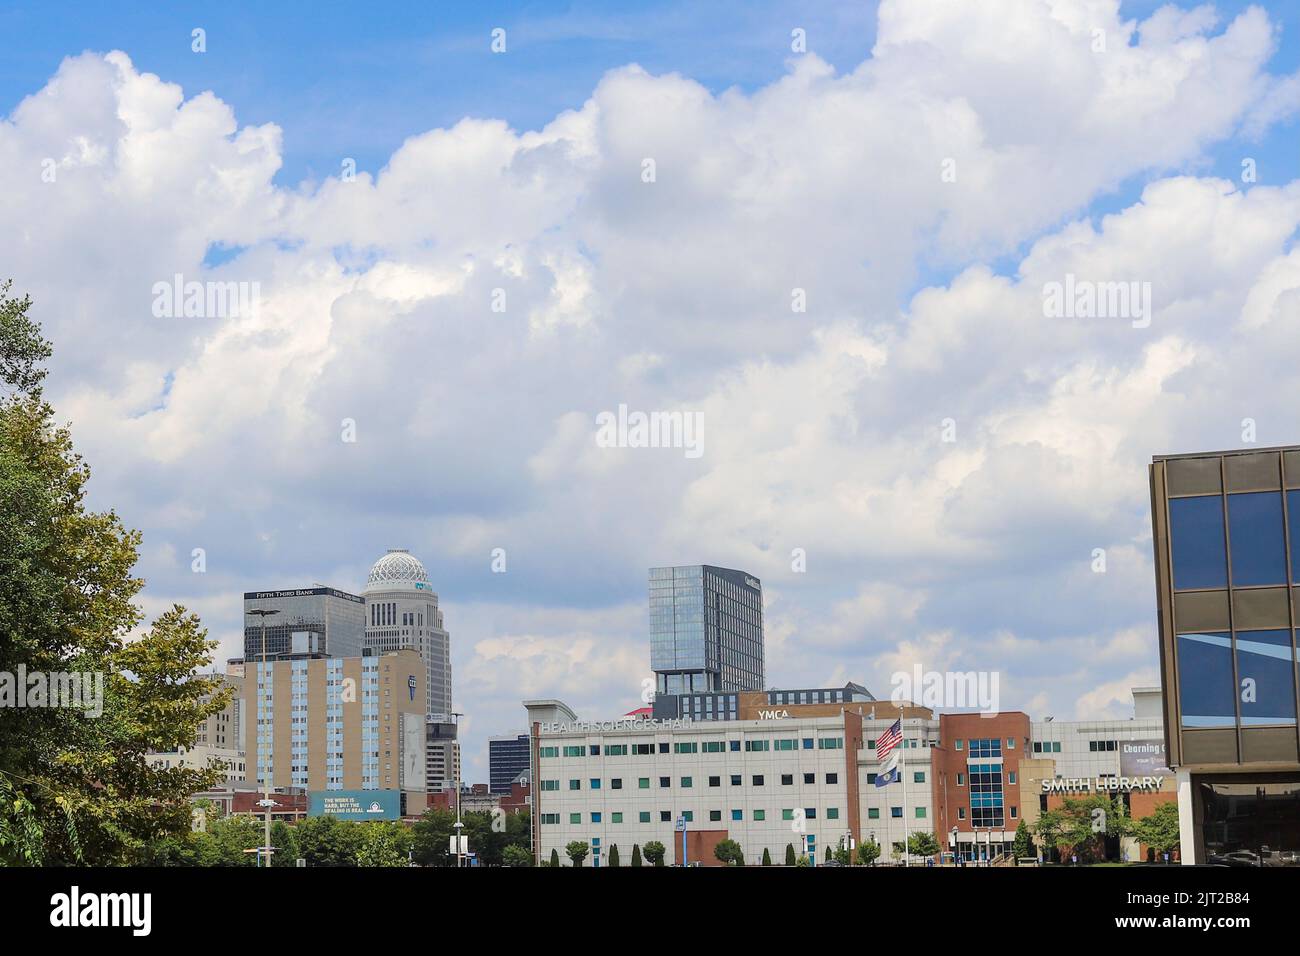 Louisville, Kentucky USA  August 27, 2022: A view of the Jefferson Community College in downtown Louisville, Kentucky against a blue sky Stock Photo